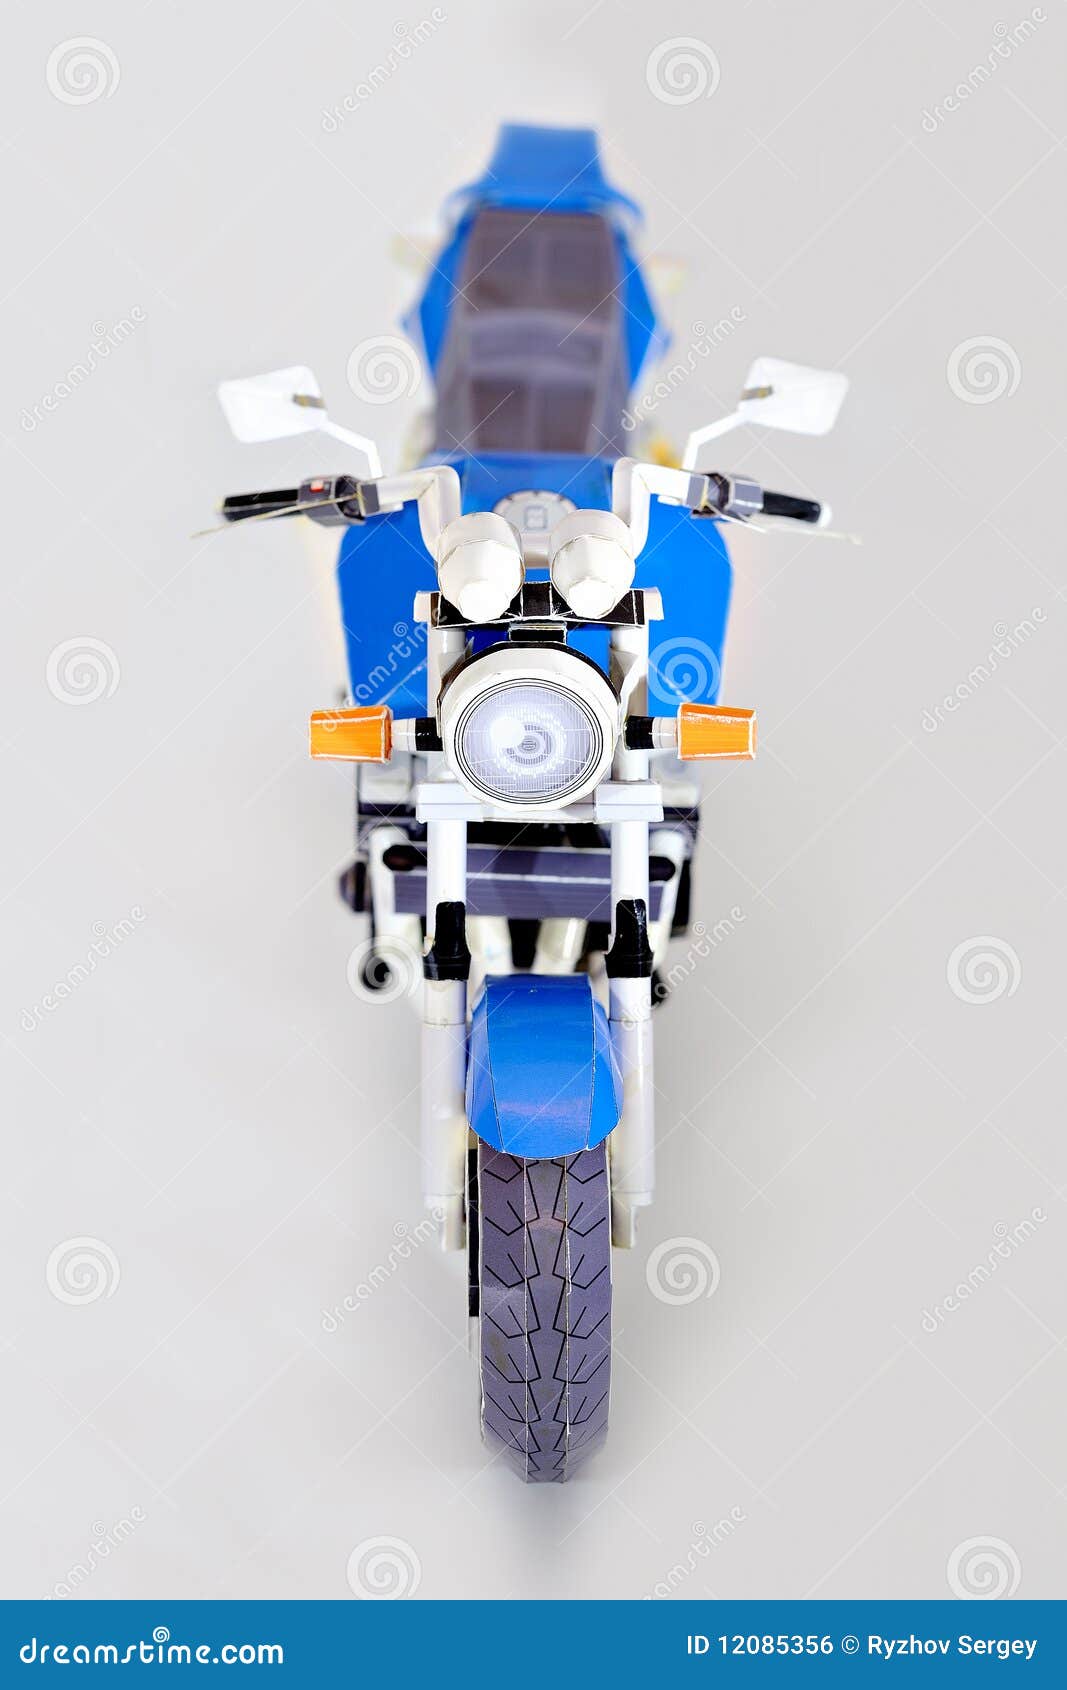 Royalty Free Stock Image: Paper motorcycle